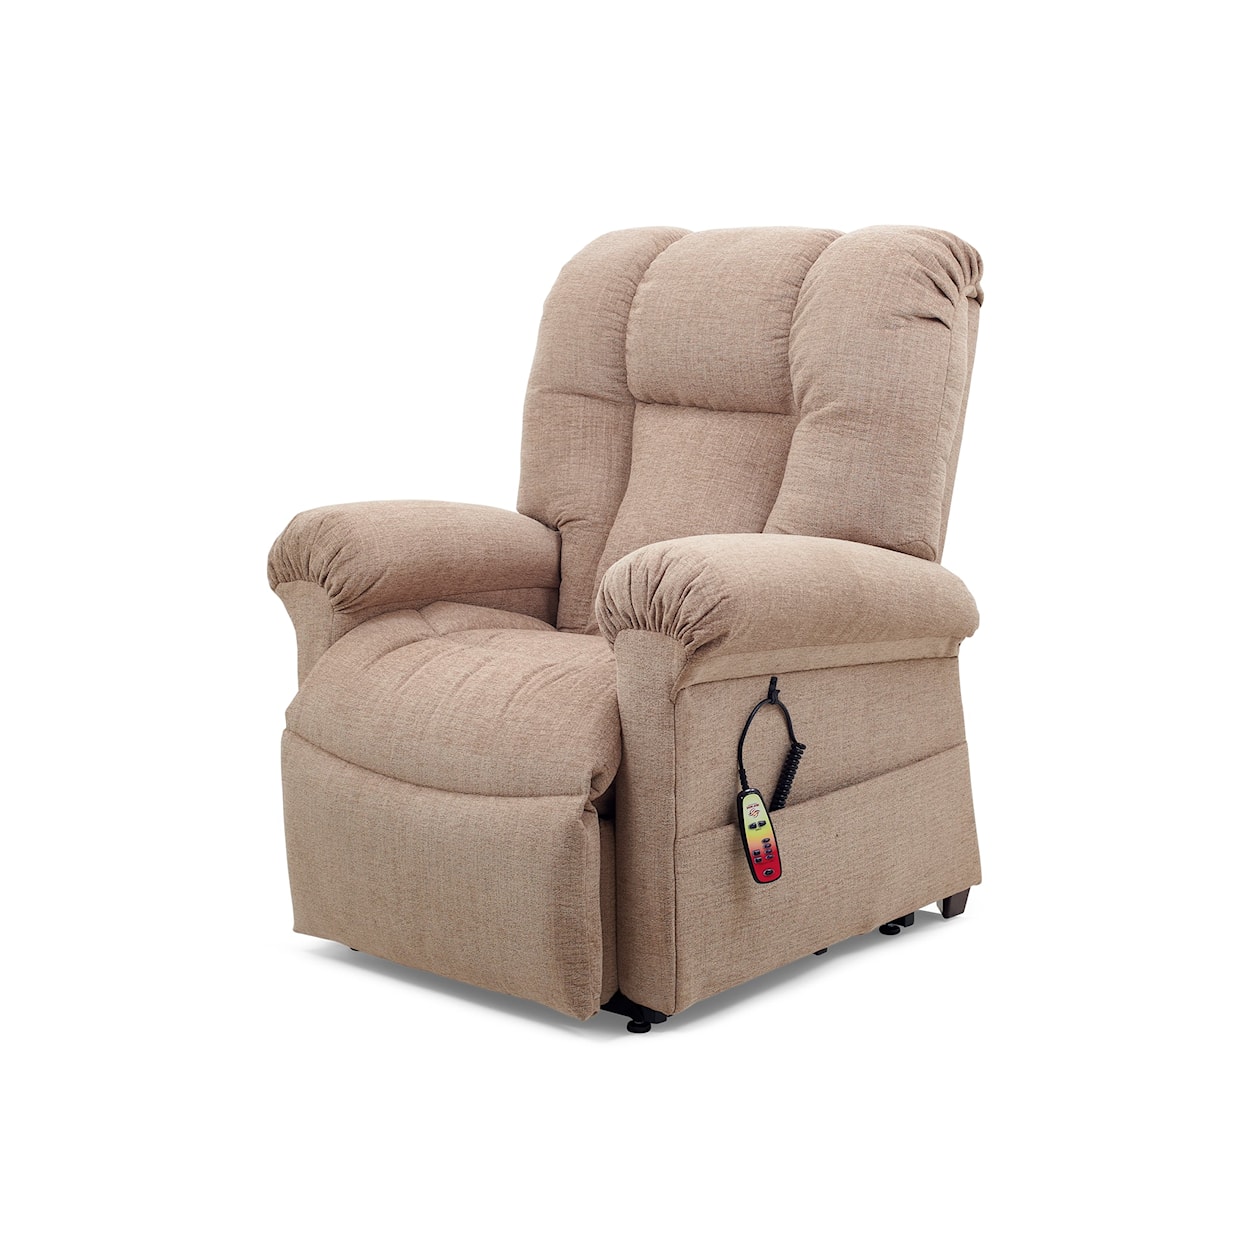 UltraComfort Sol Sol Lift Chair with HeatWave